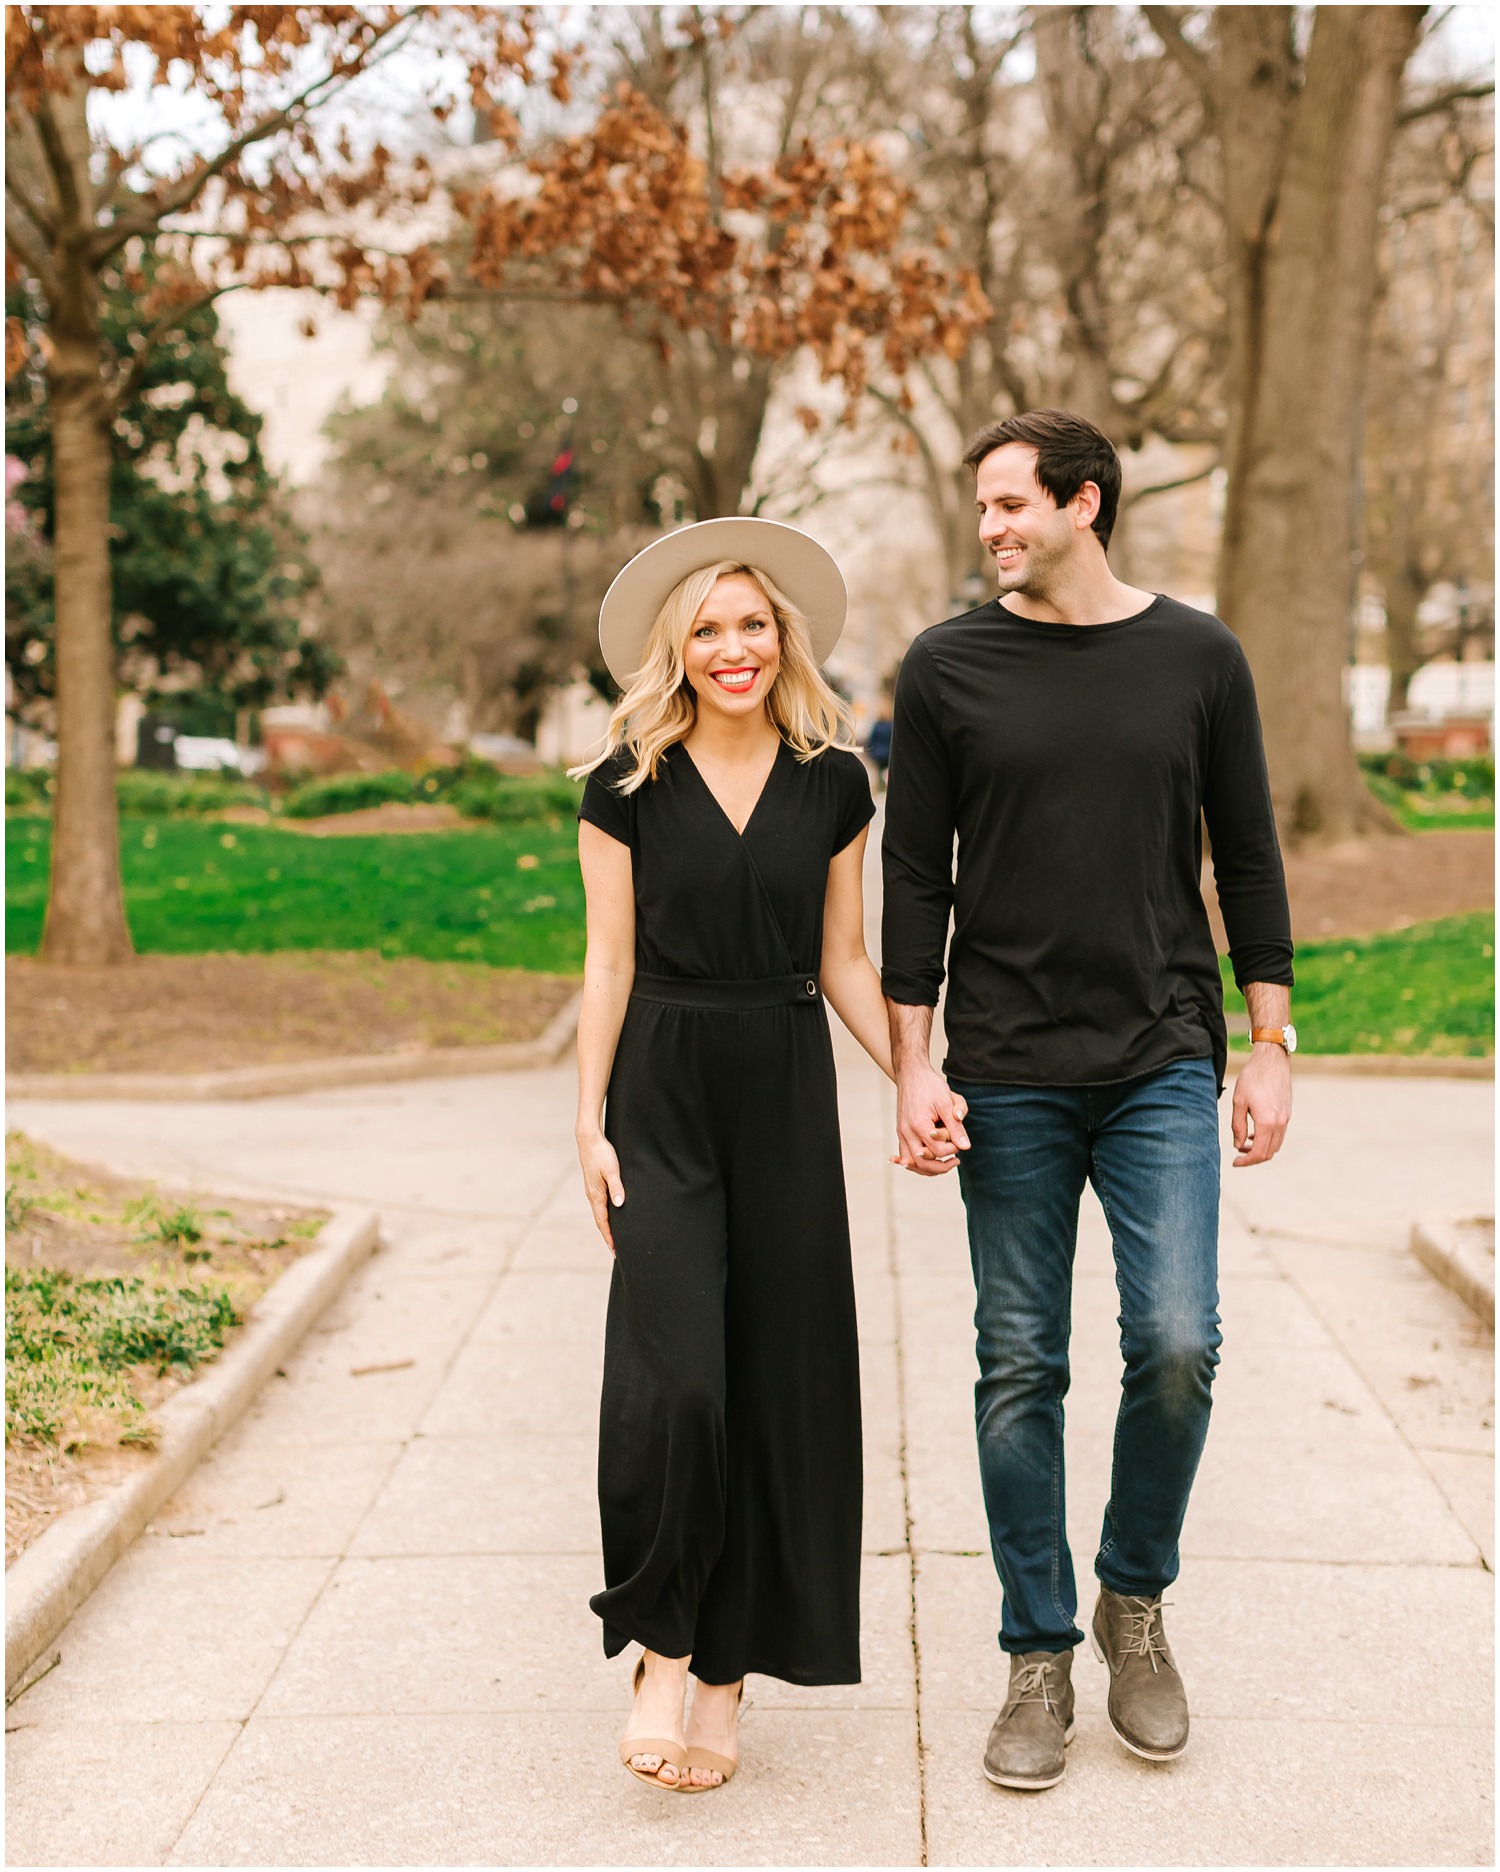 downtown engagement portraits in Raleigh NC during the fall